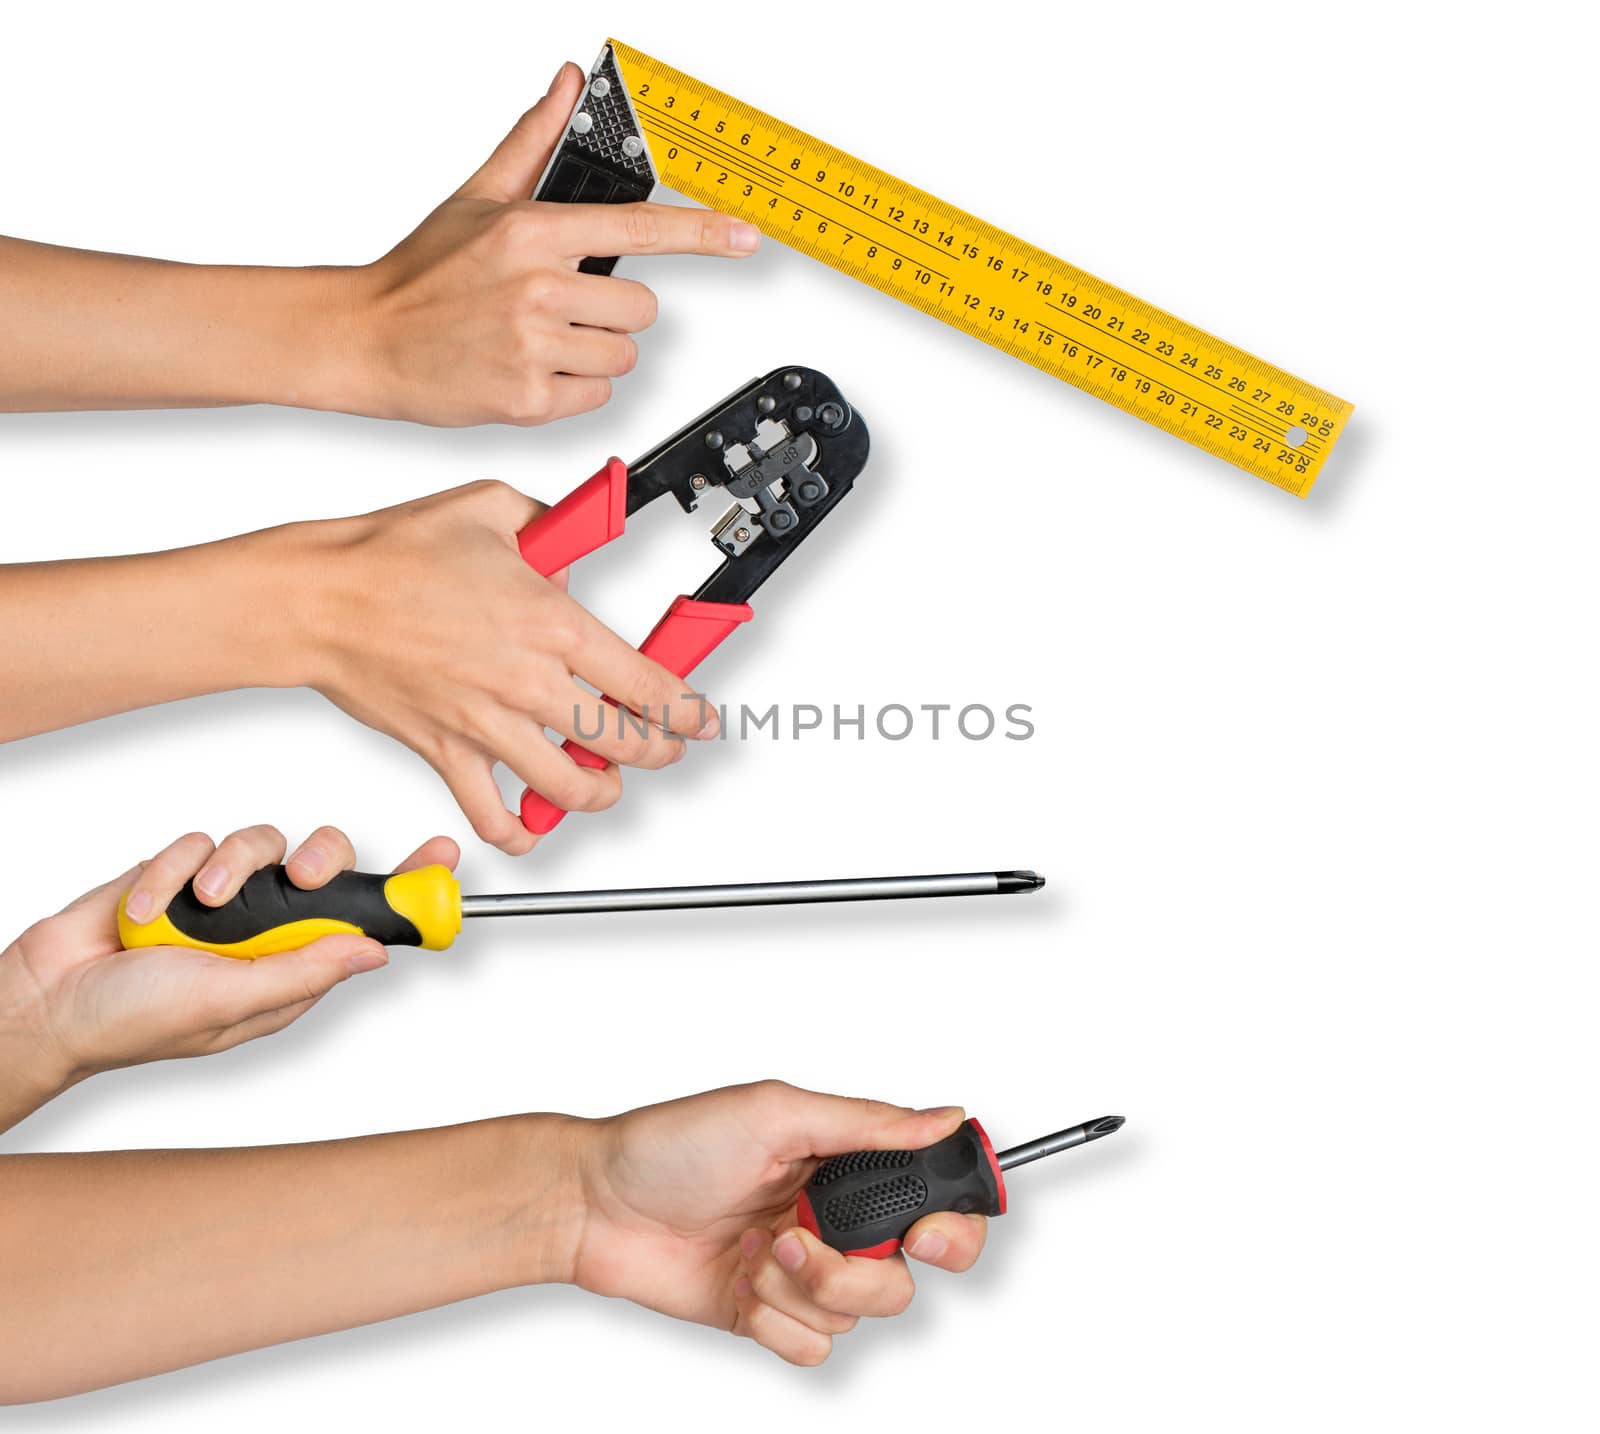 Peoples hands holding tools by cherezoff